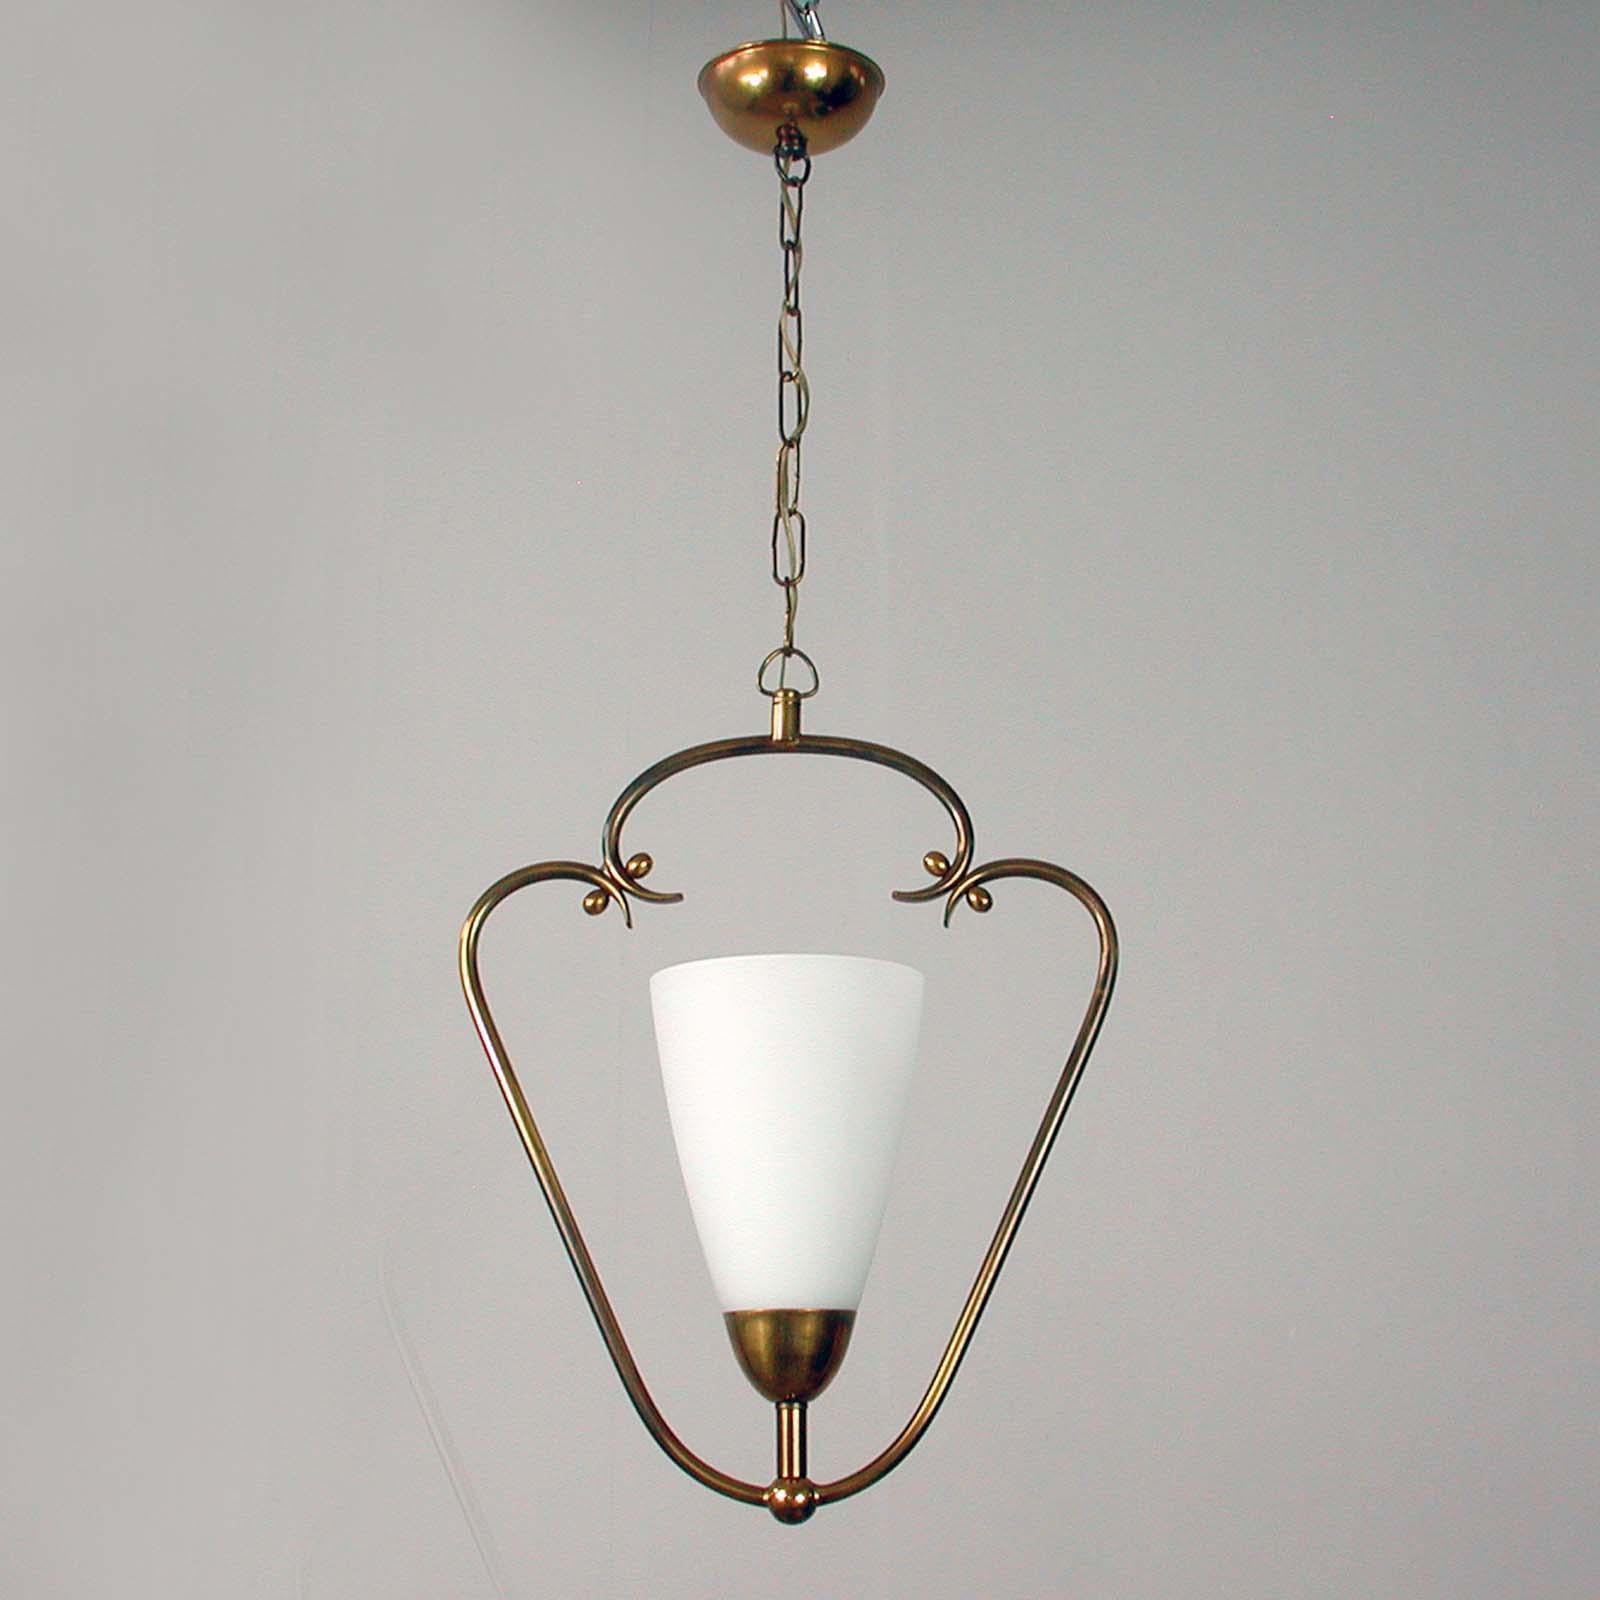 Art Deco 1940s Swedish Brass and Frosted Glass Lantern